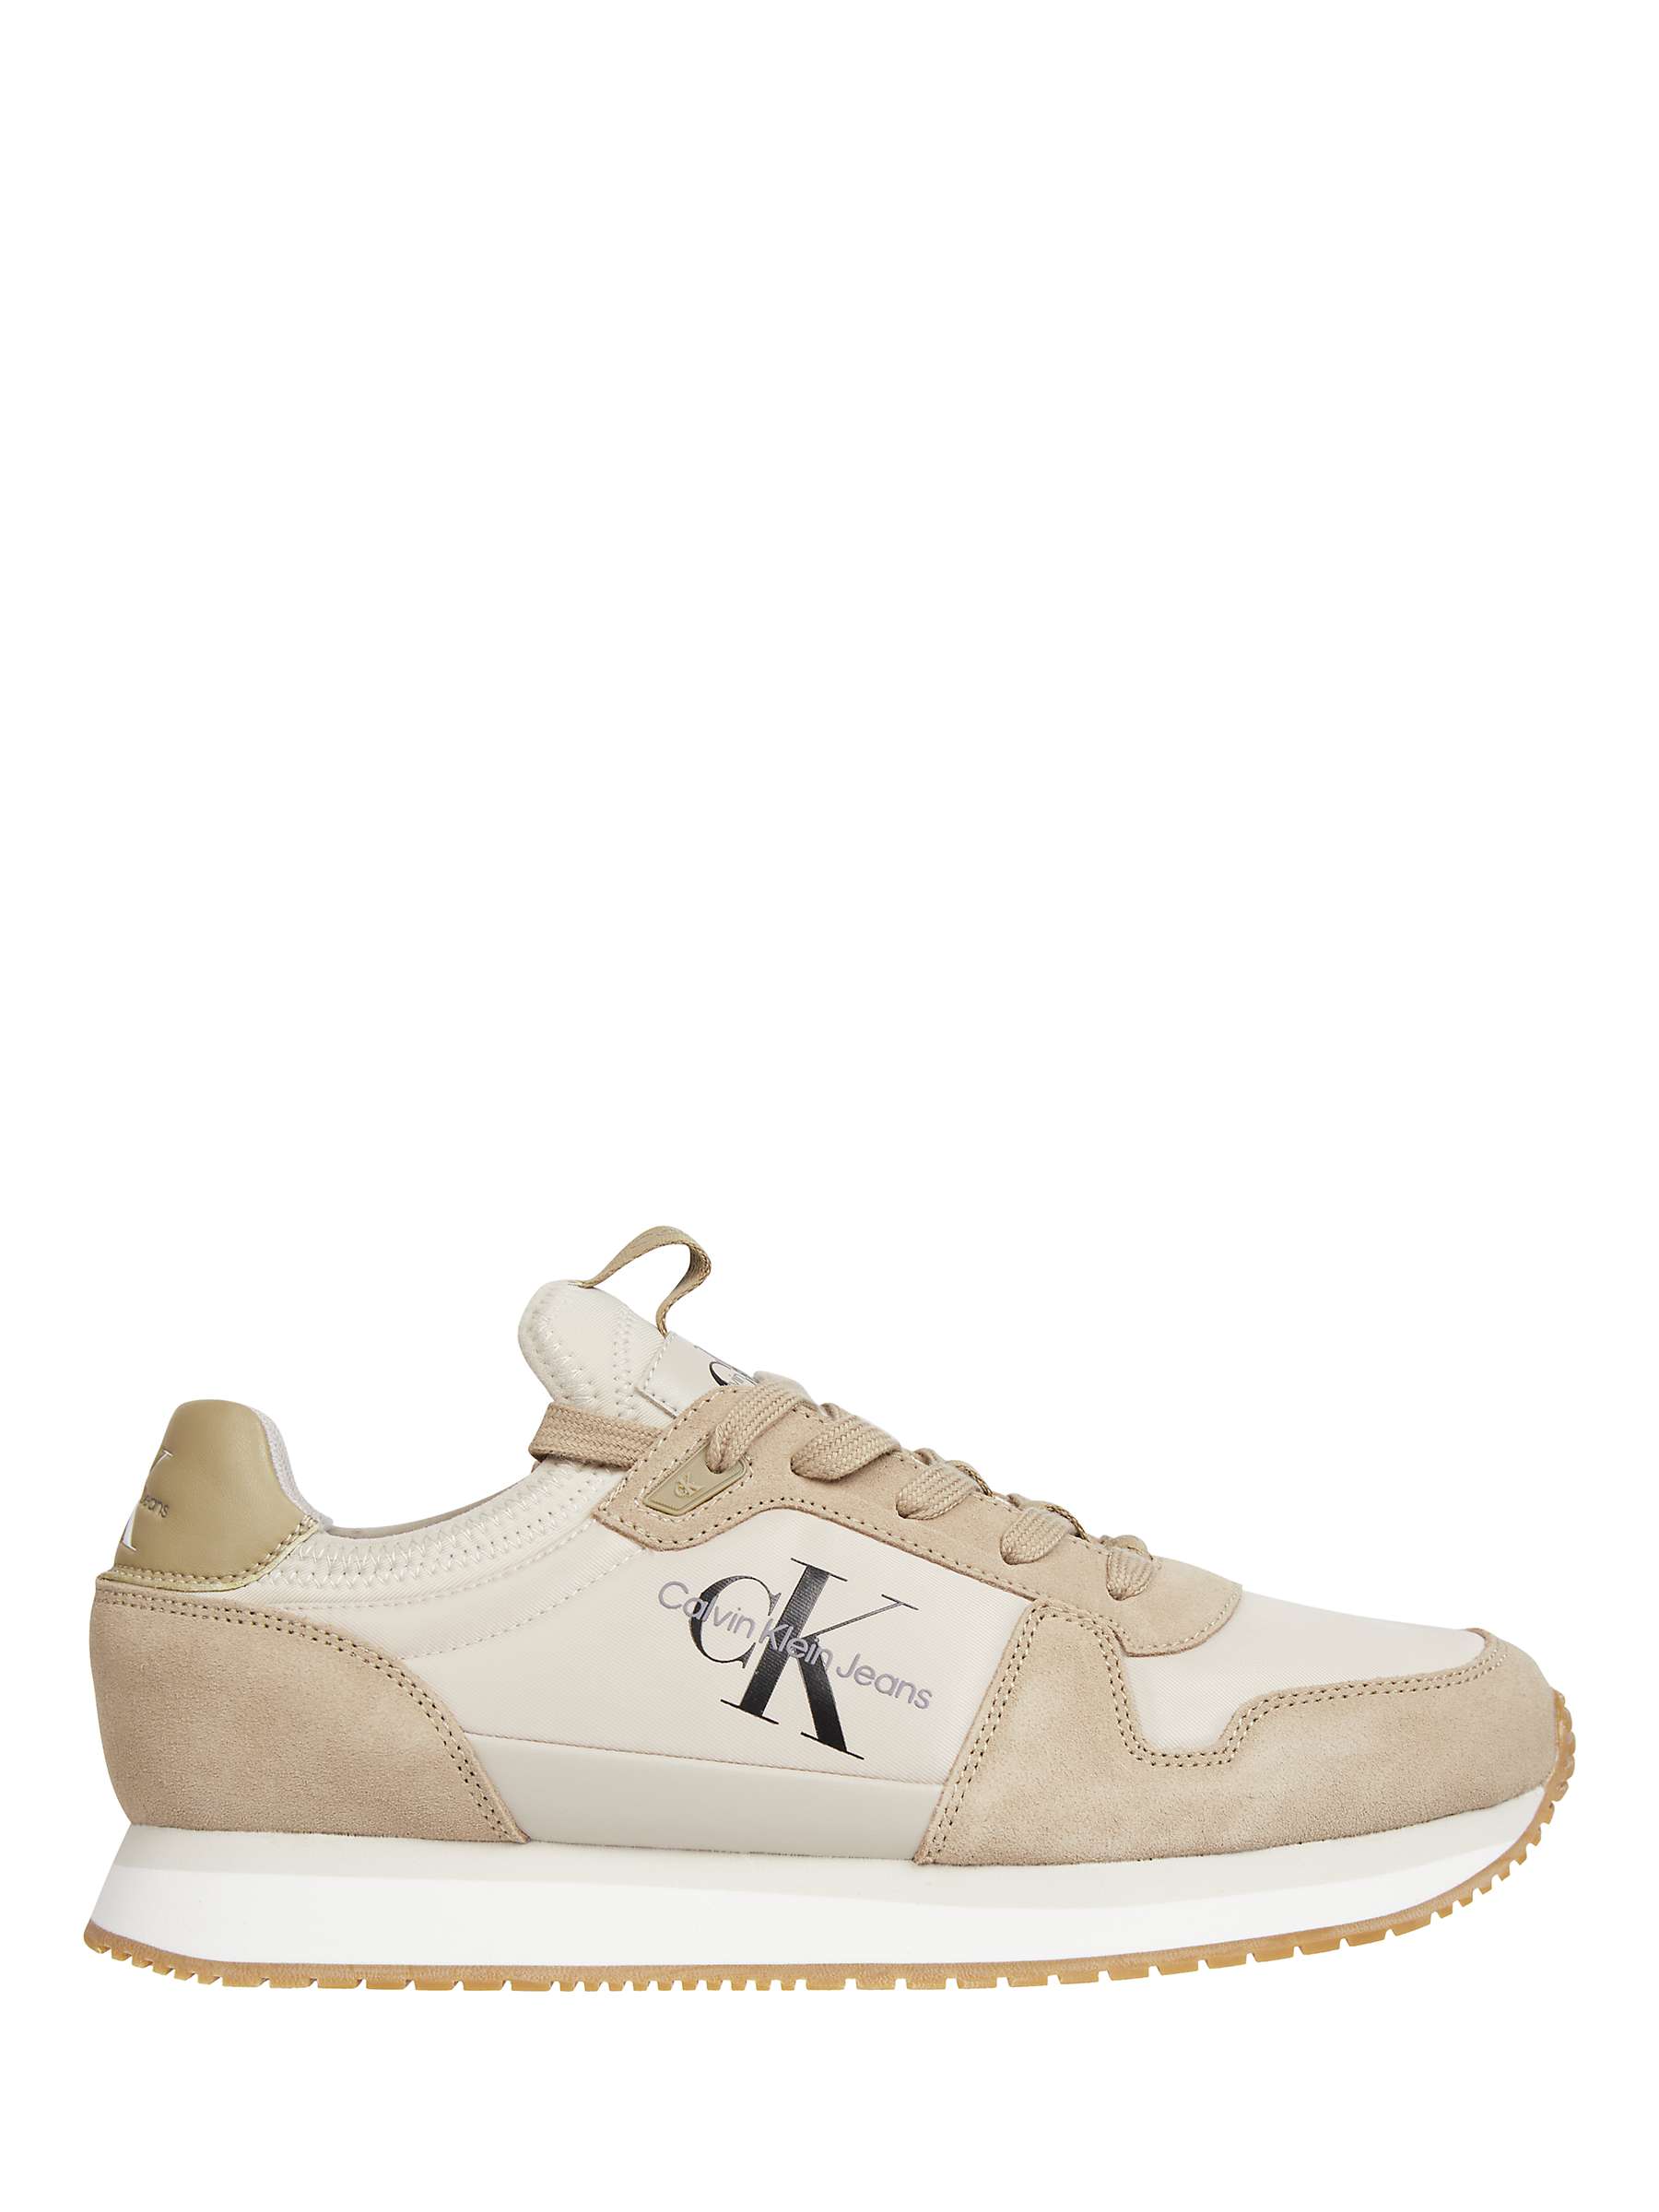 Buy Calvin Klein Suede Lace Up Runner Trainers, Eggshell/Travertine Online at johnlewis.com